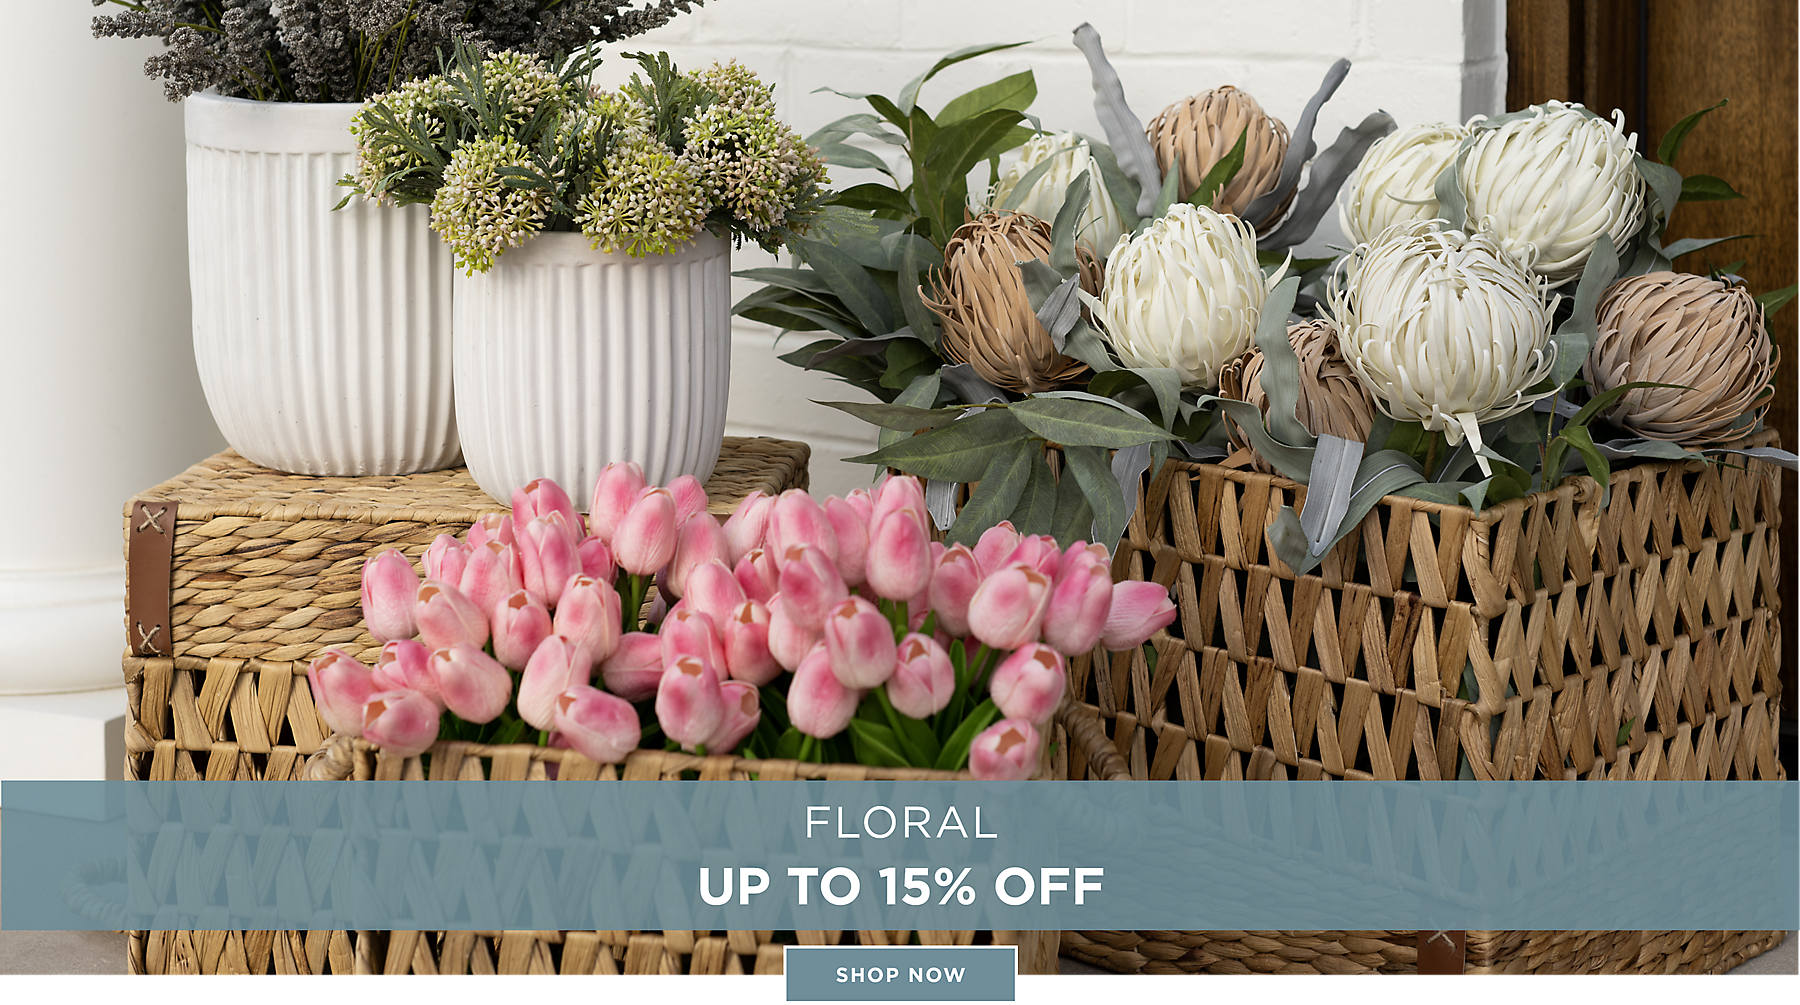 Floral Up to 15% Off Shop Now